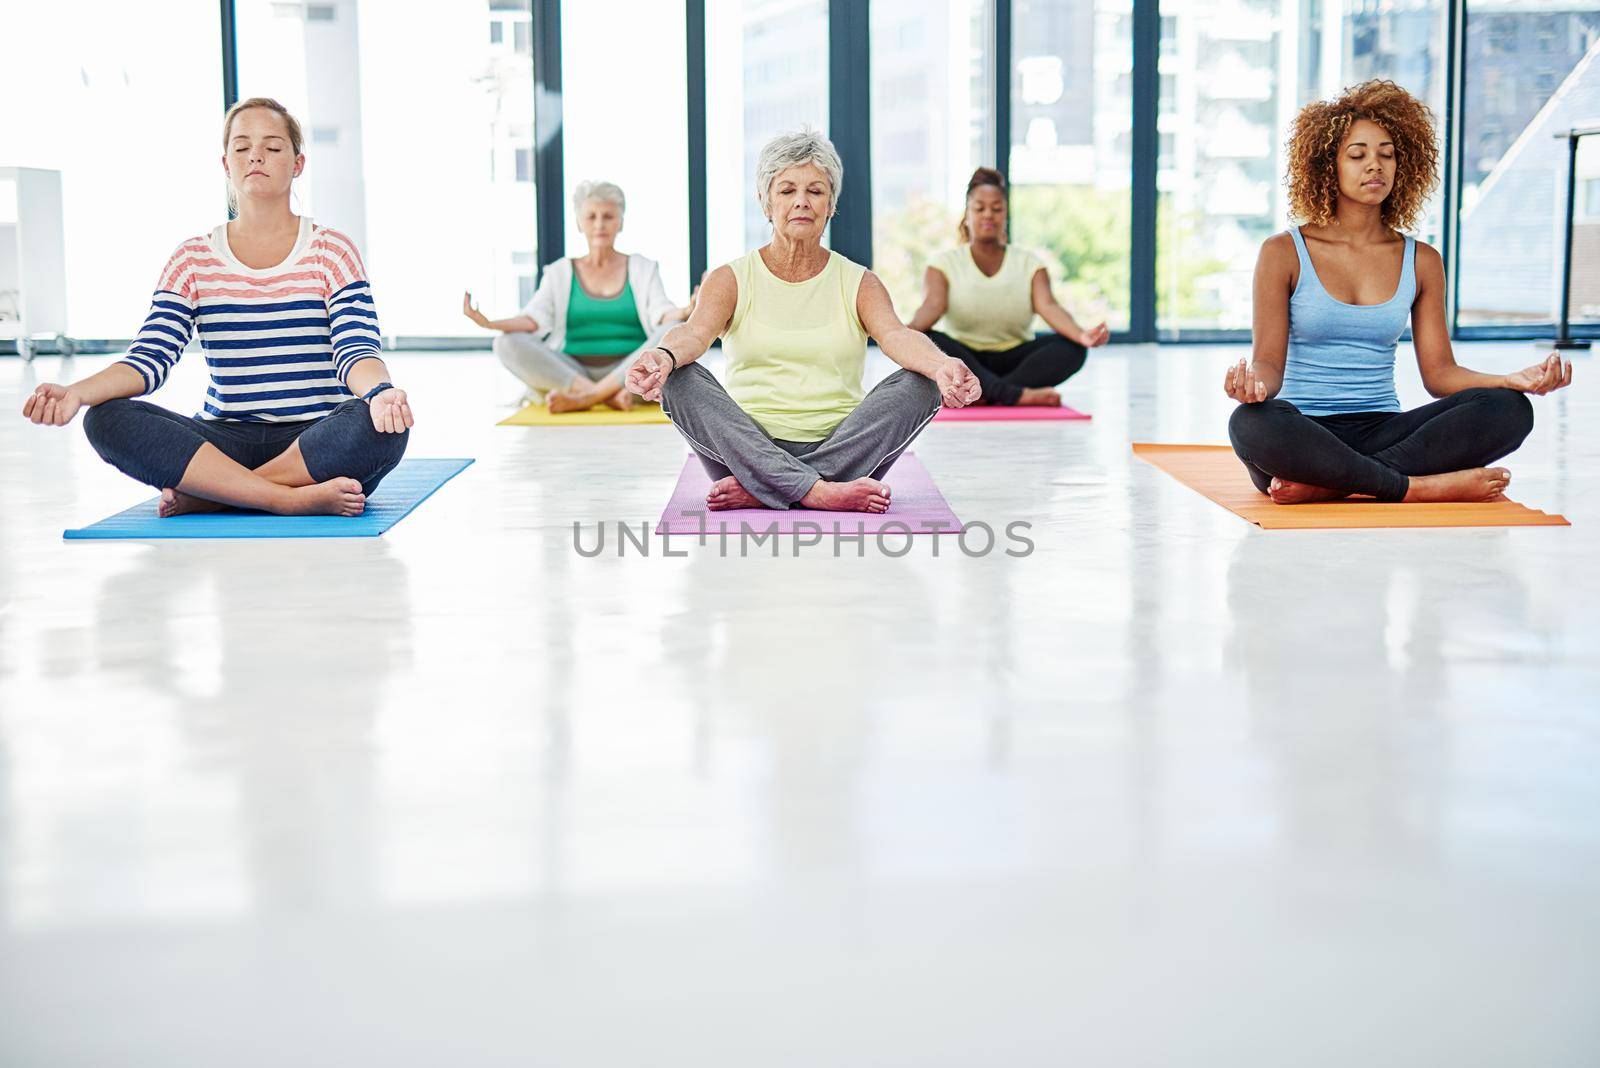 Shot of a group of women meditating indoors.